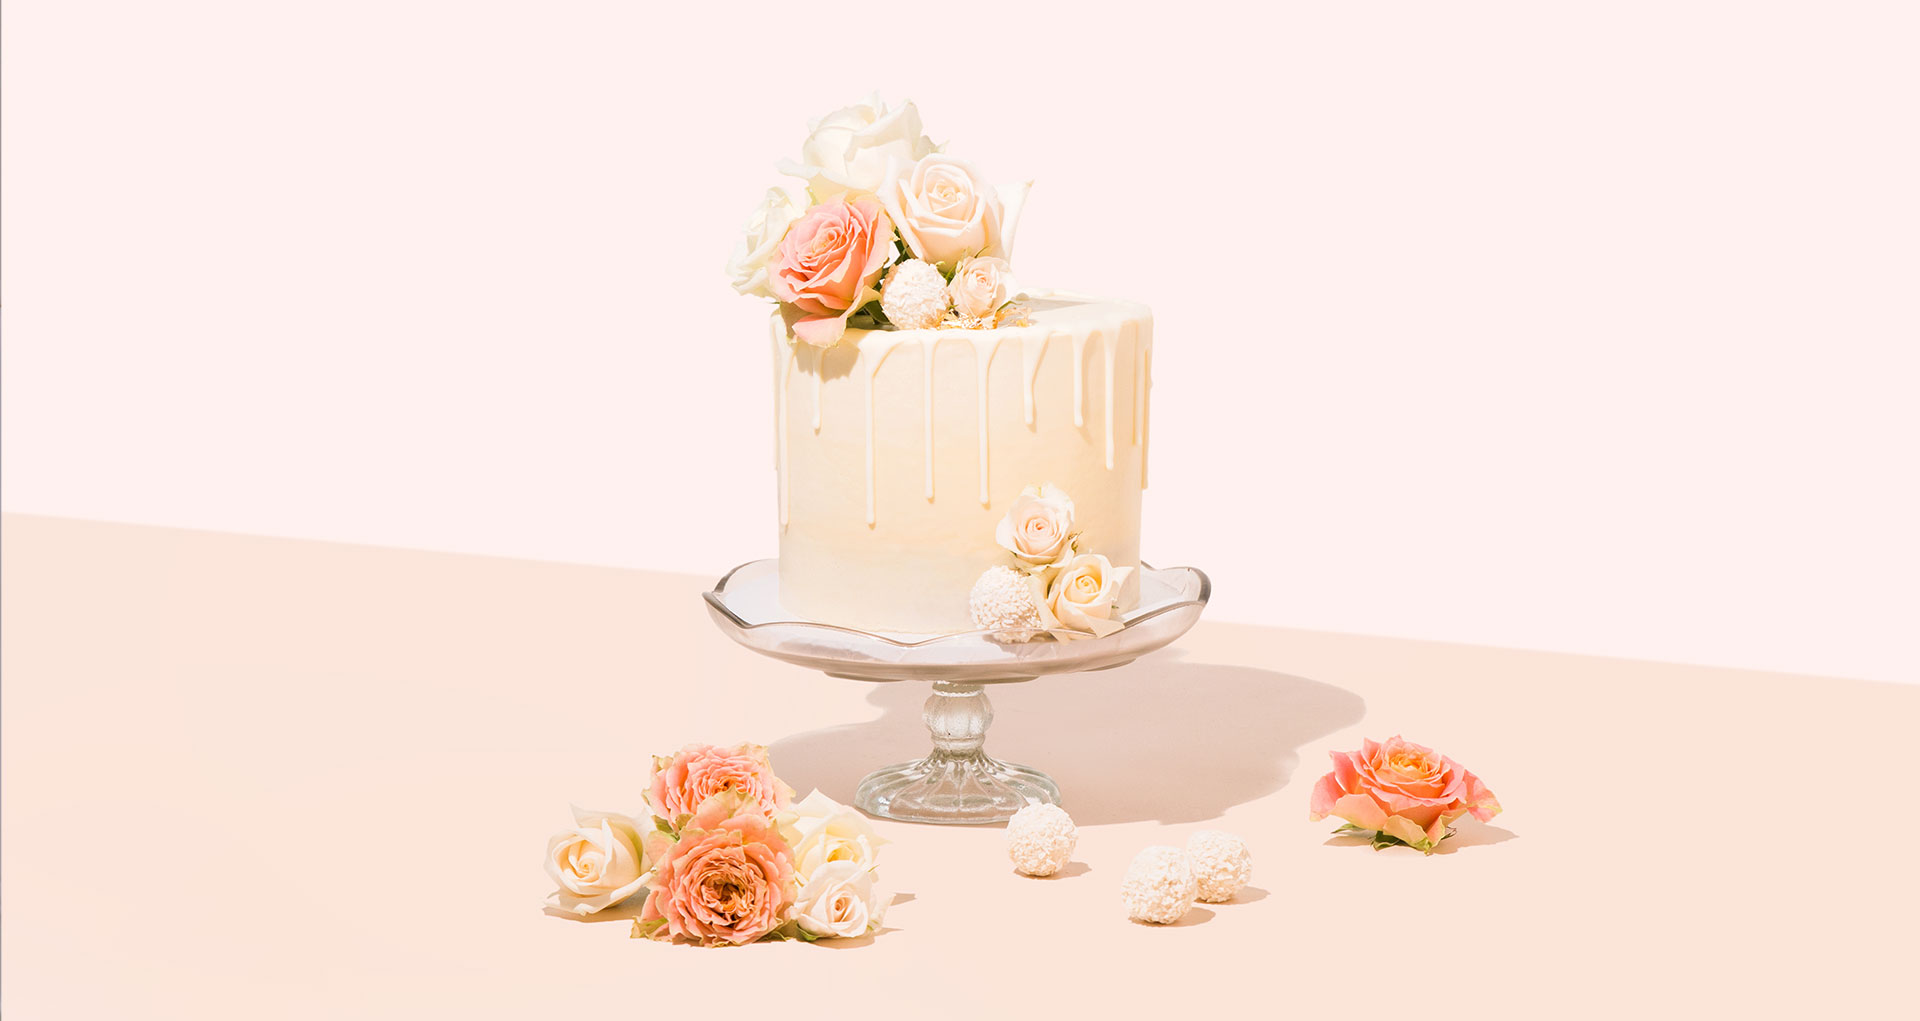 Rose Crafted Cakes Auckland Order Cake Online